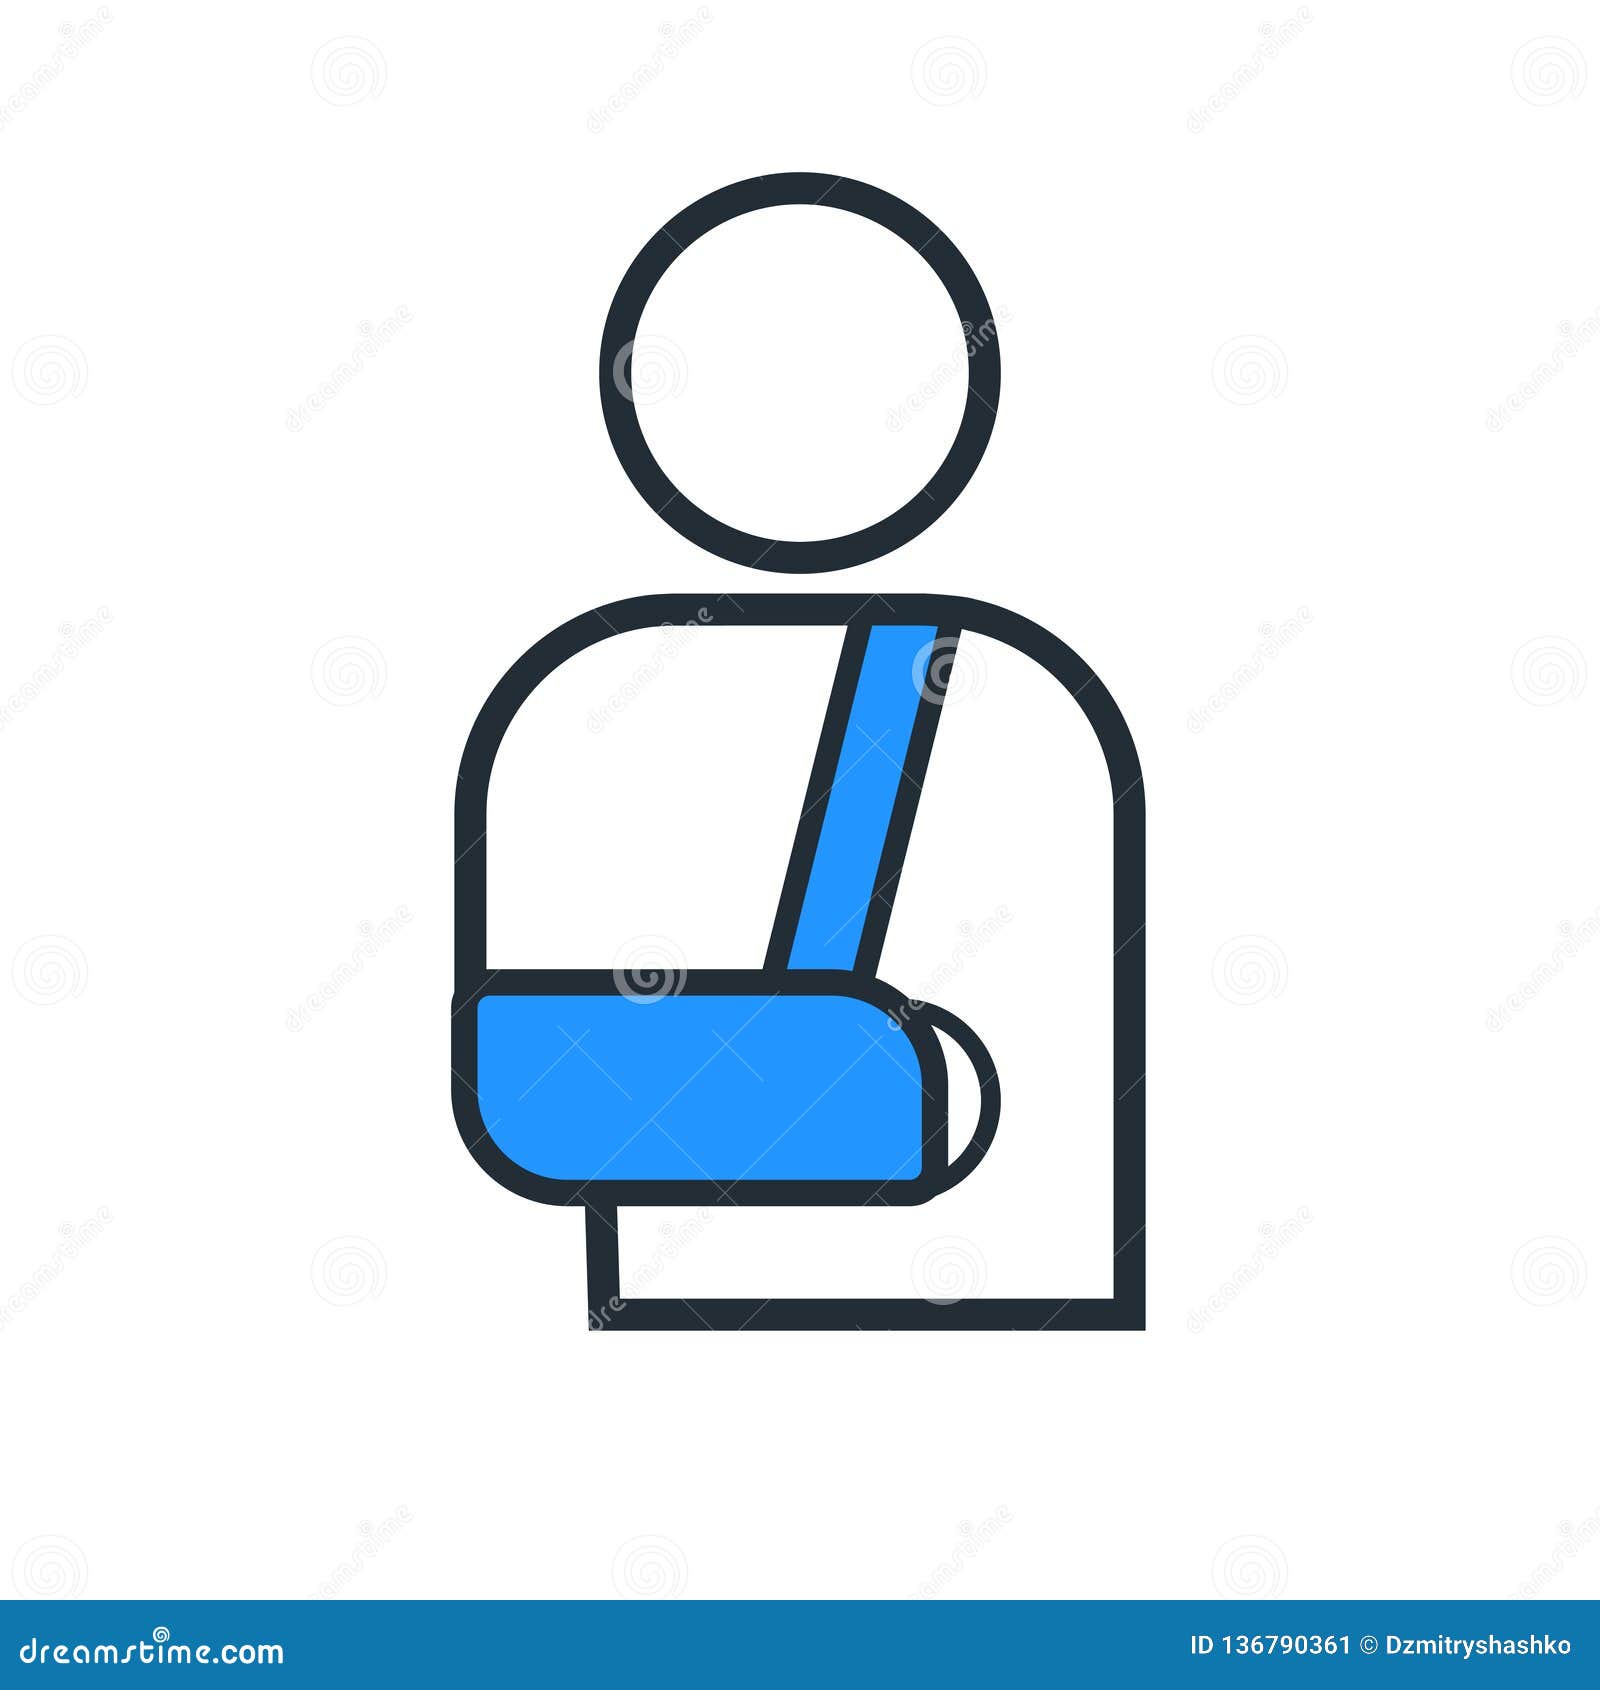 Arm Sling Icon Stock Illustrations 213 Arm Sling Icon Stock Illustrations Vectors Clipart Dreamstime